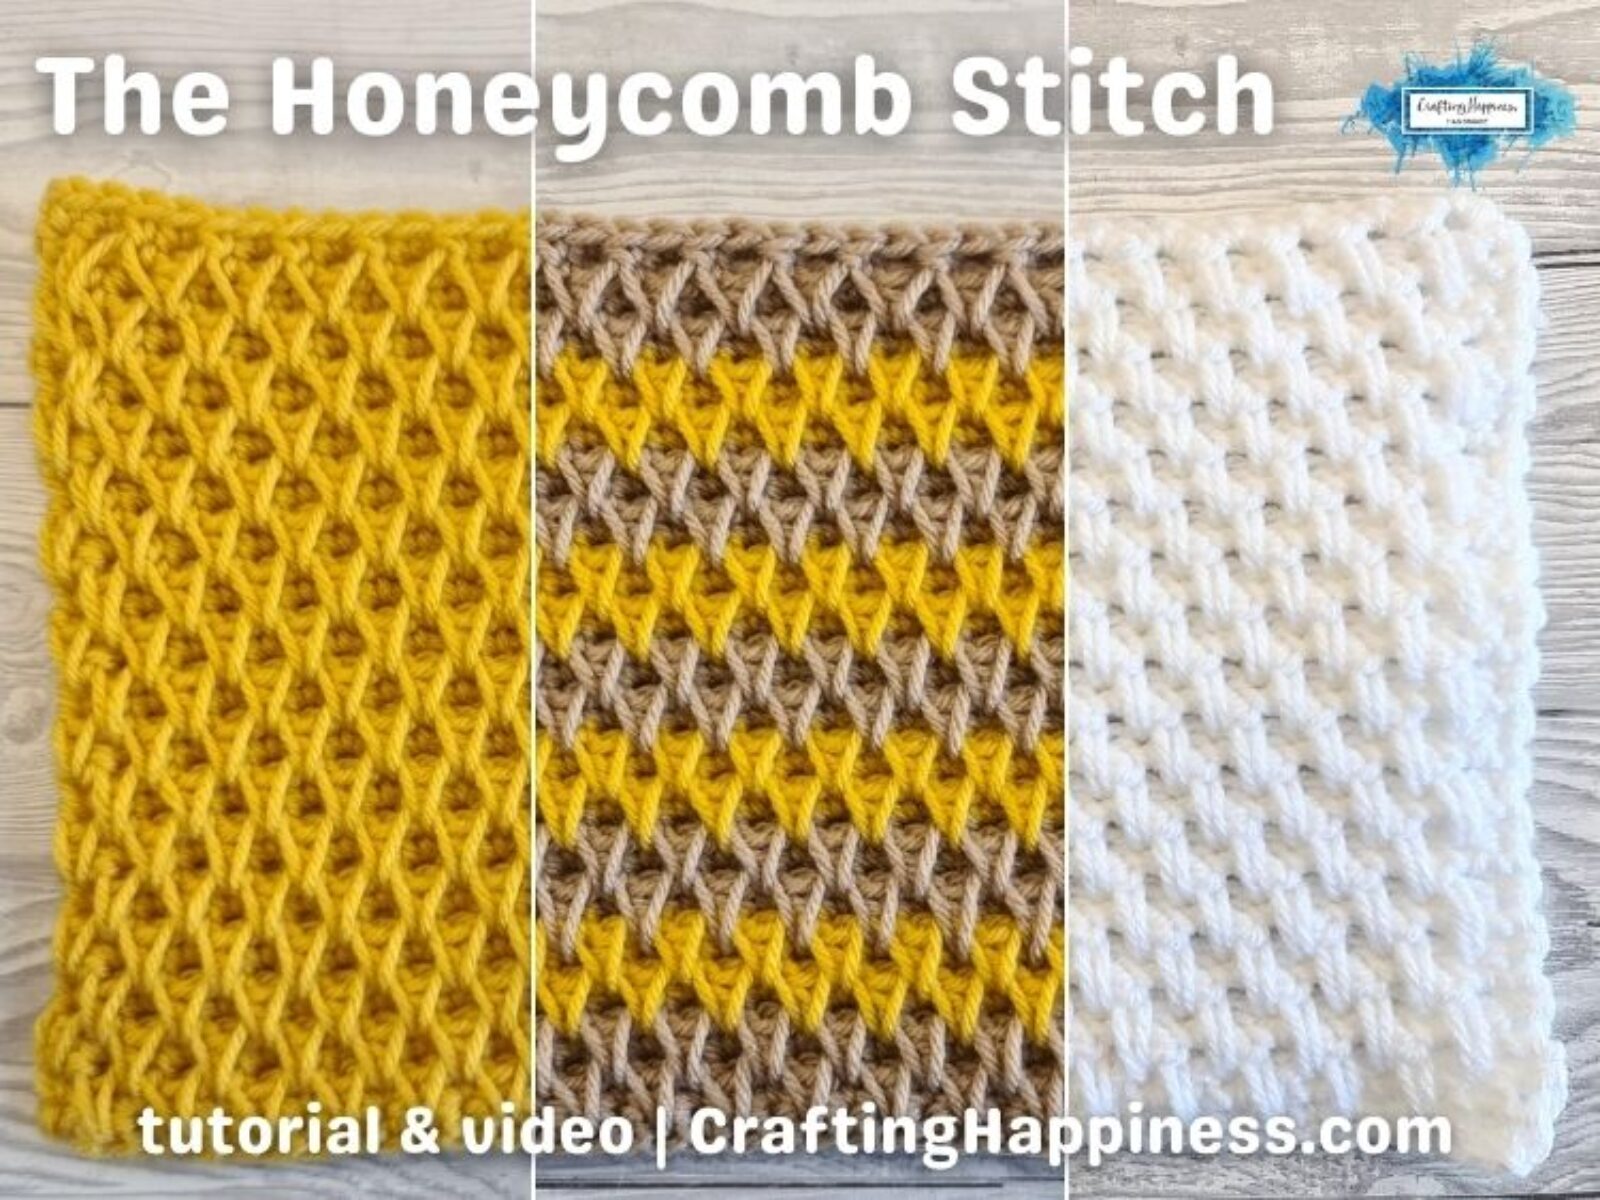 FB BLOG POSTER - Honeycomb Stitch Crafting Happiness